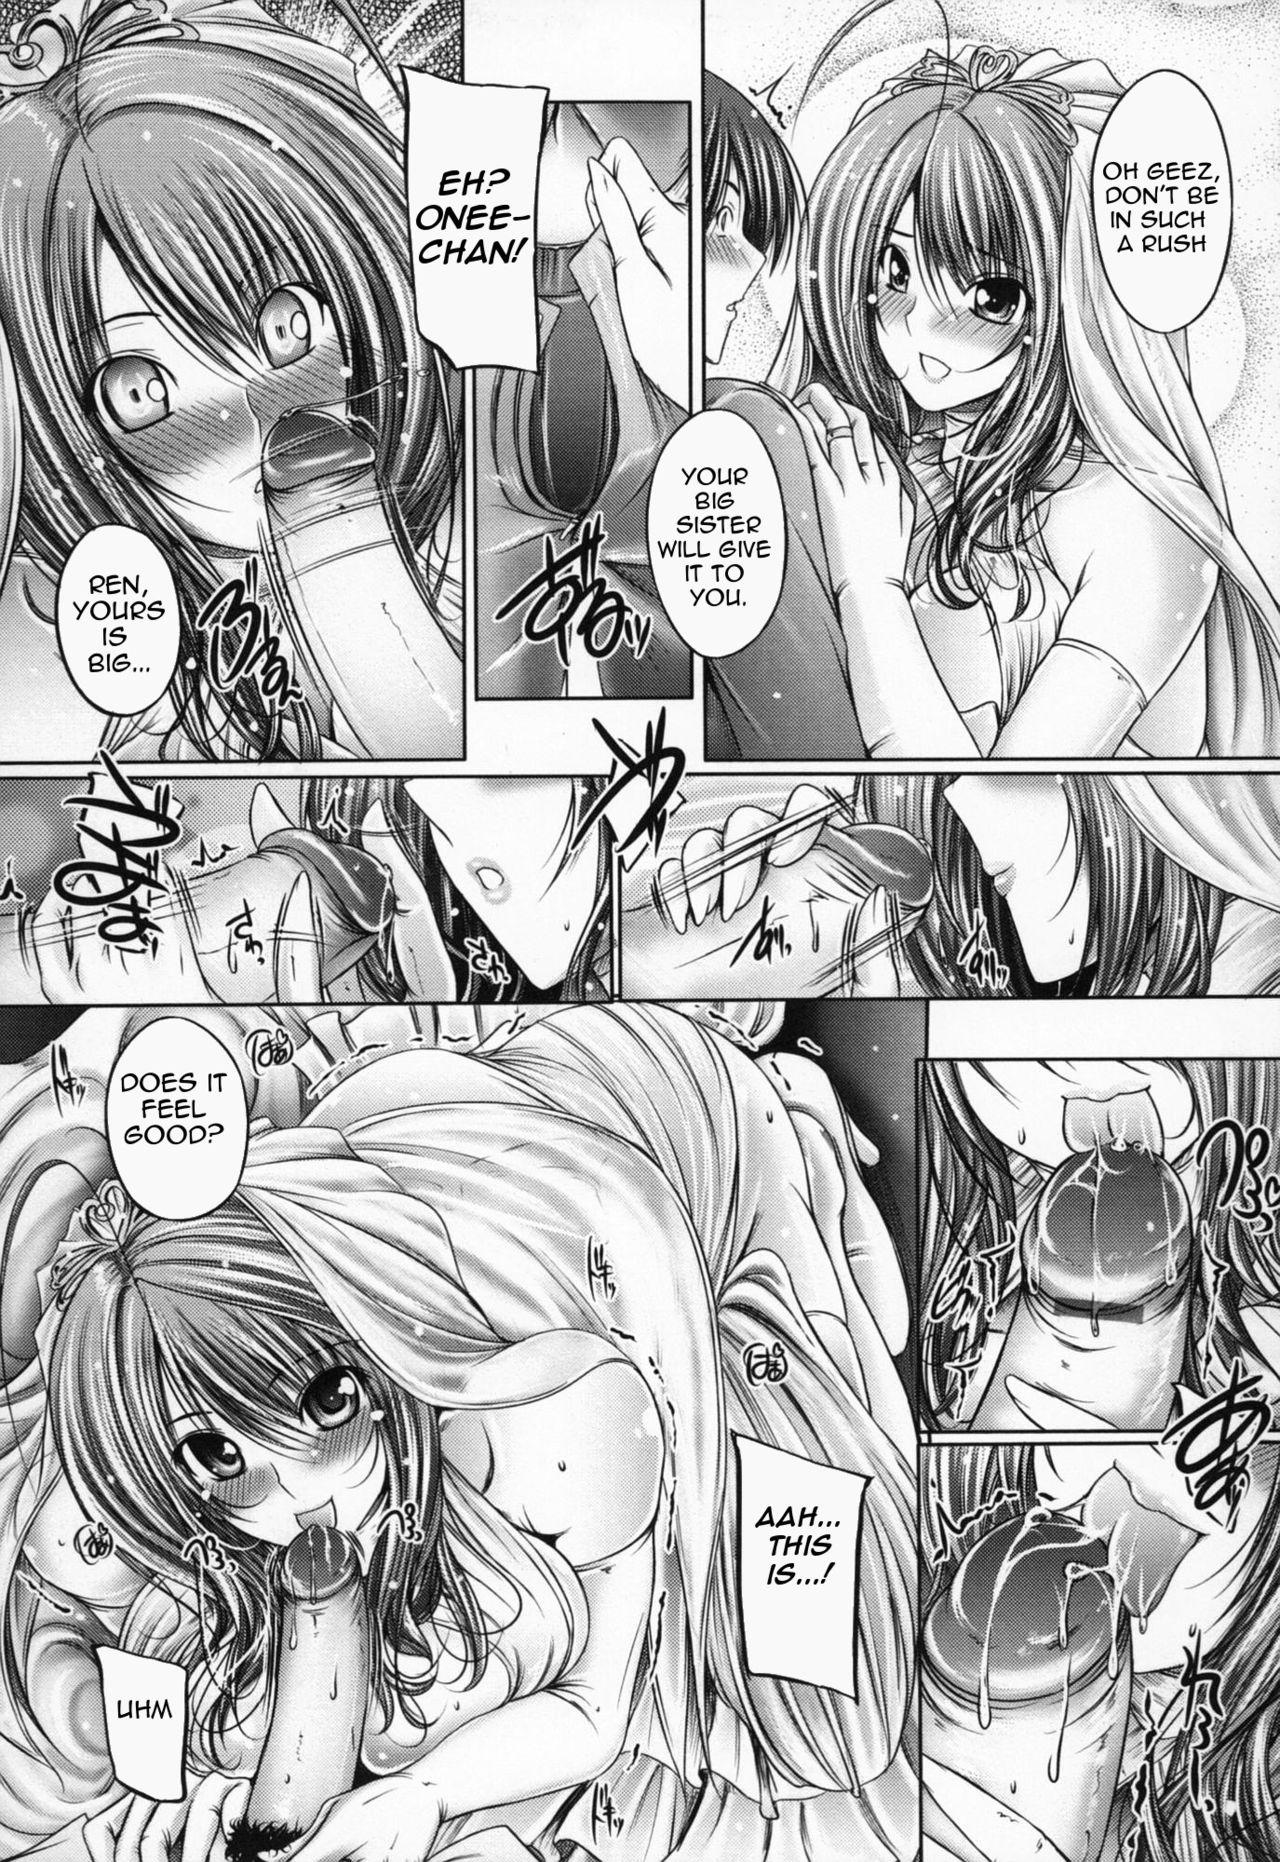 Exposed Ane wa Yome | My Sister is my Bride Gets - Page 12